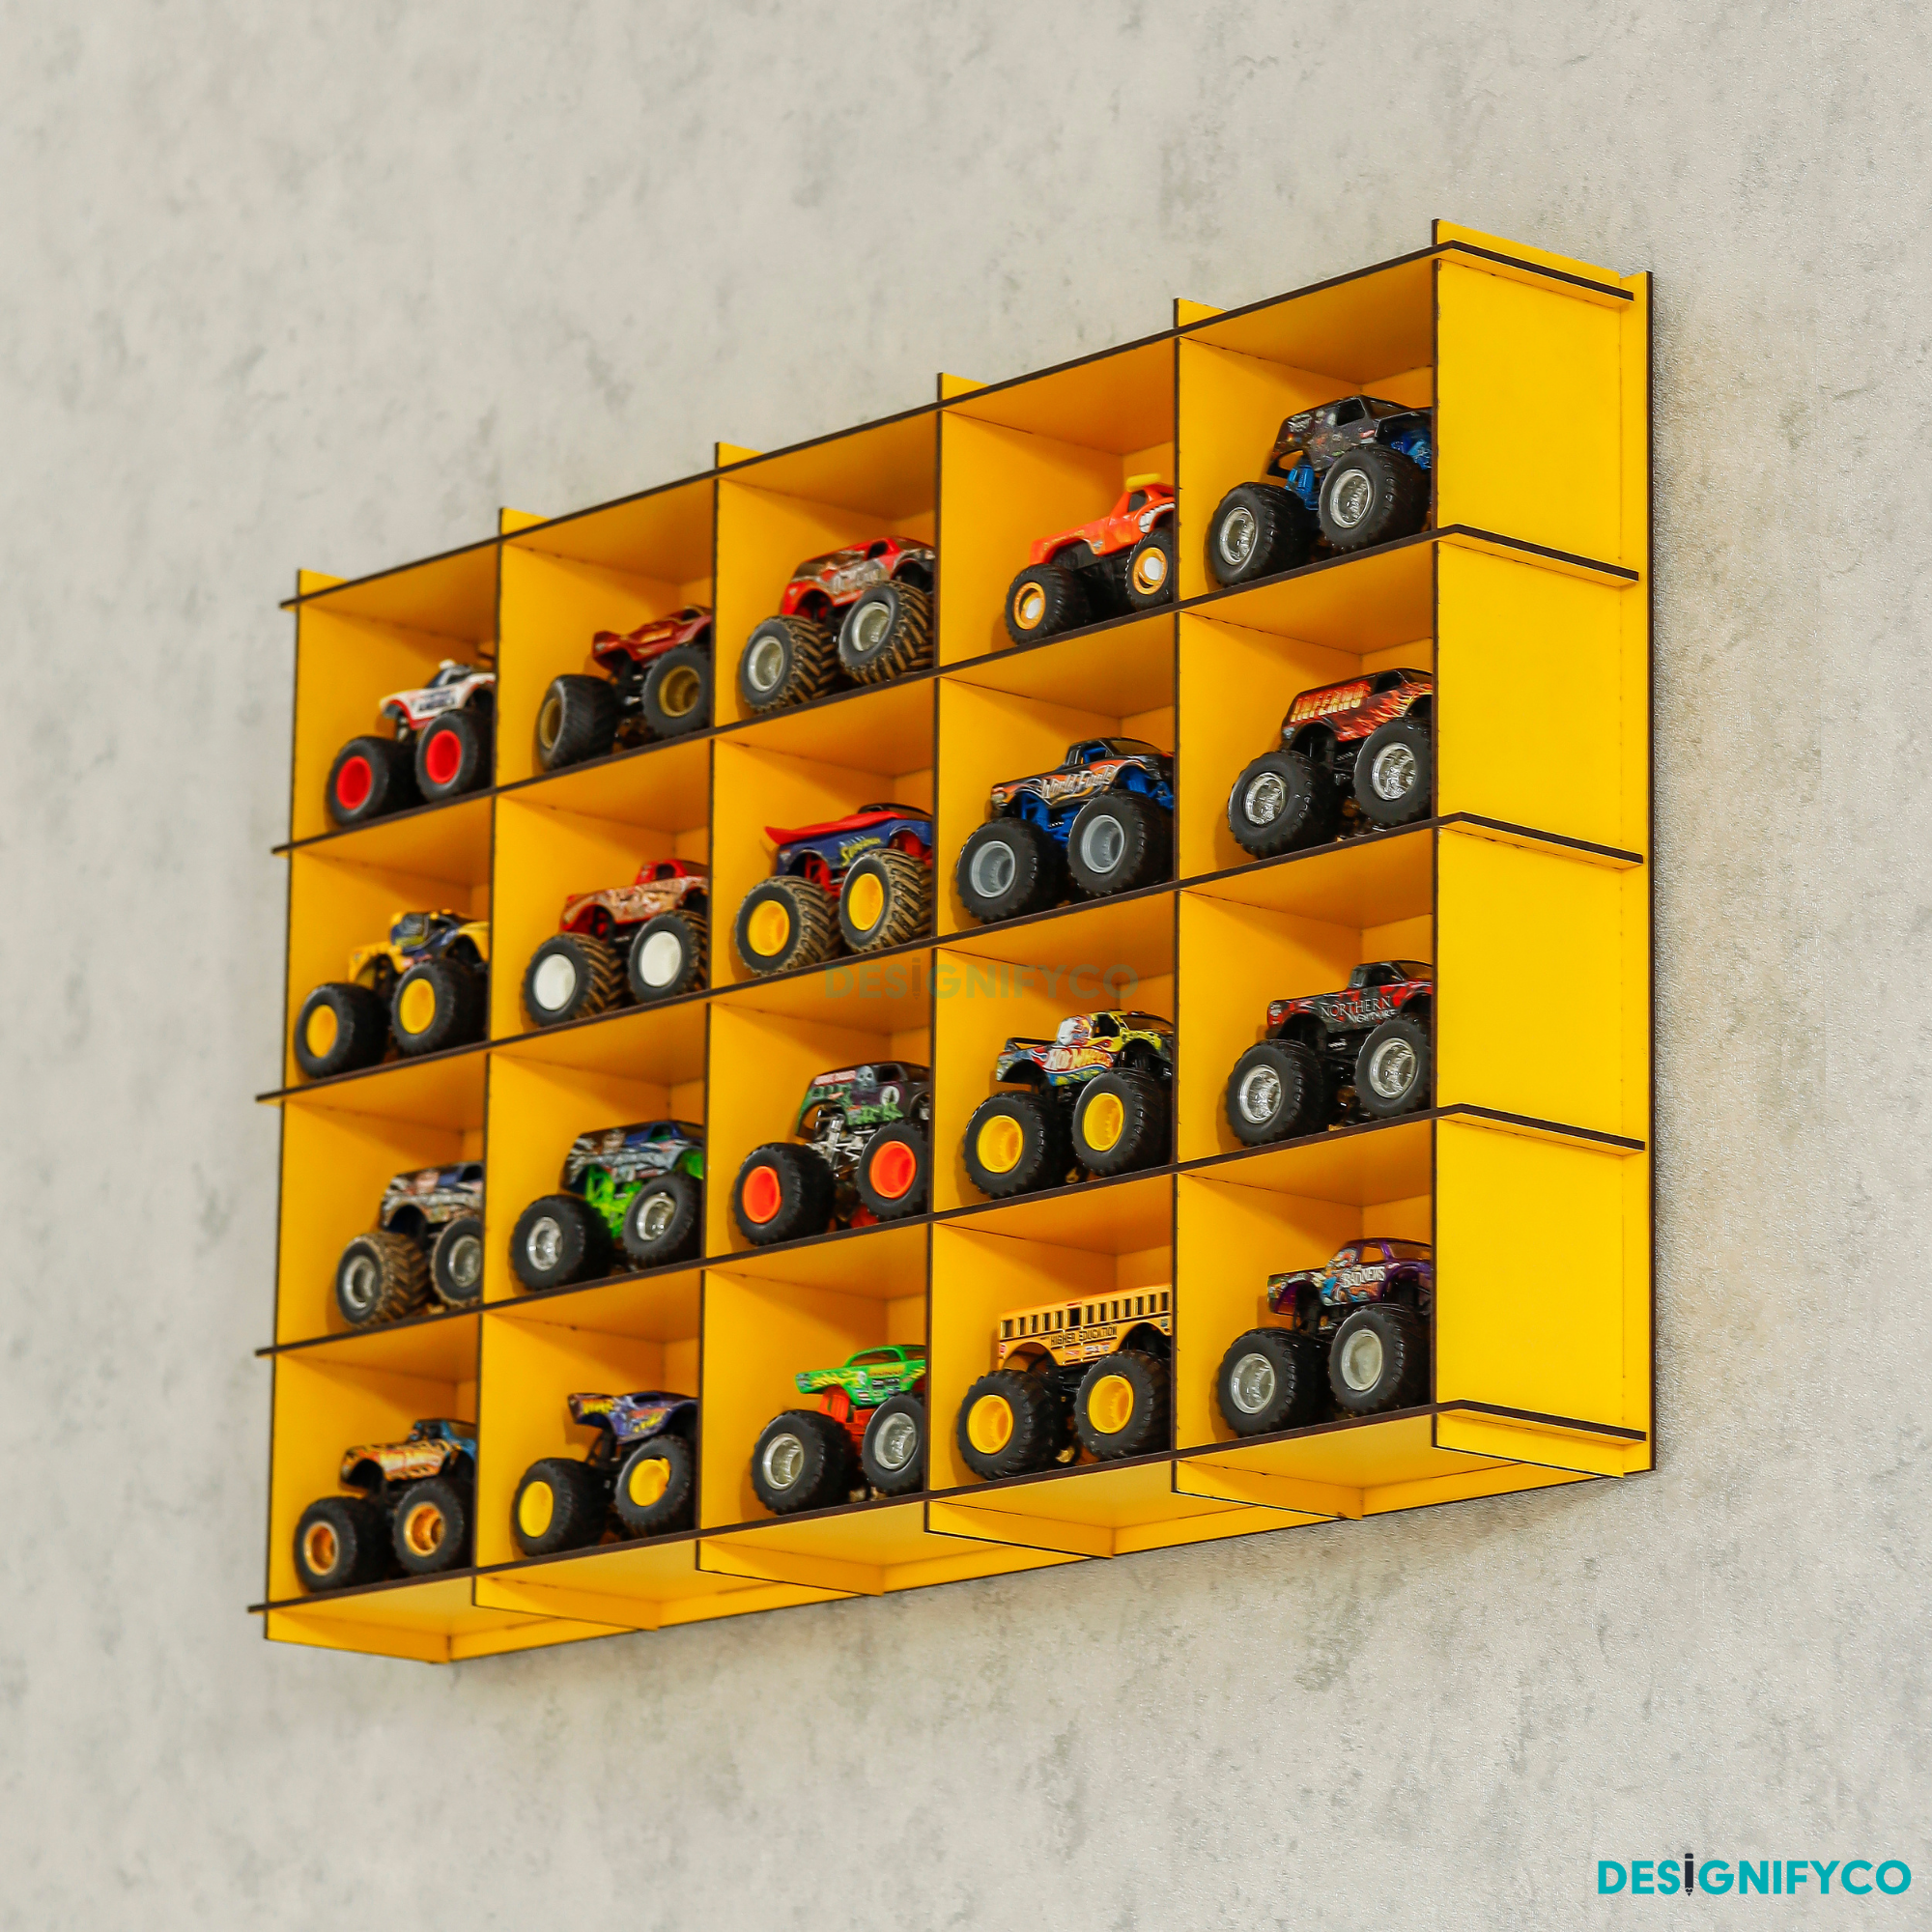 YELLOW Monster Car Display Case